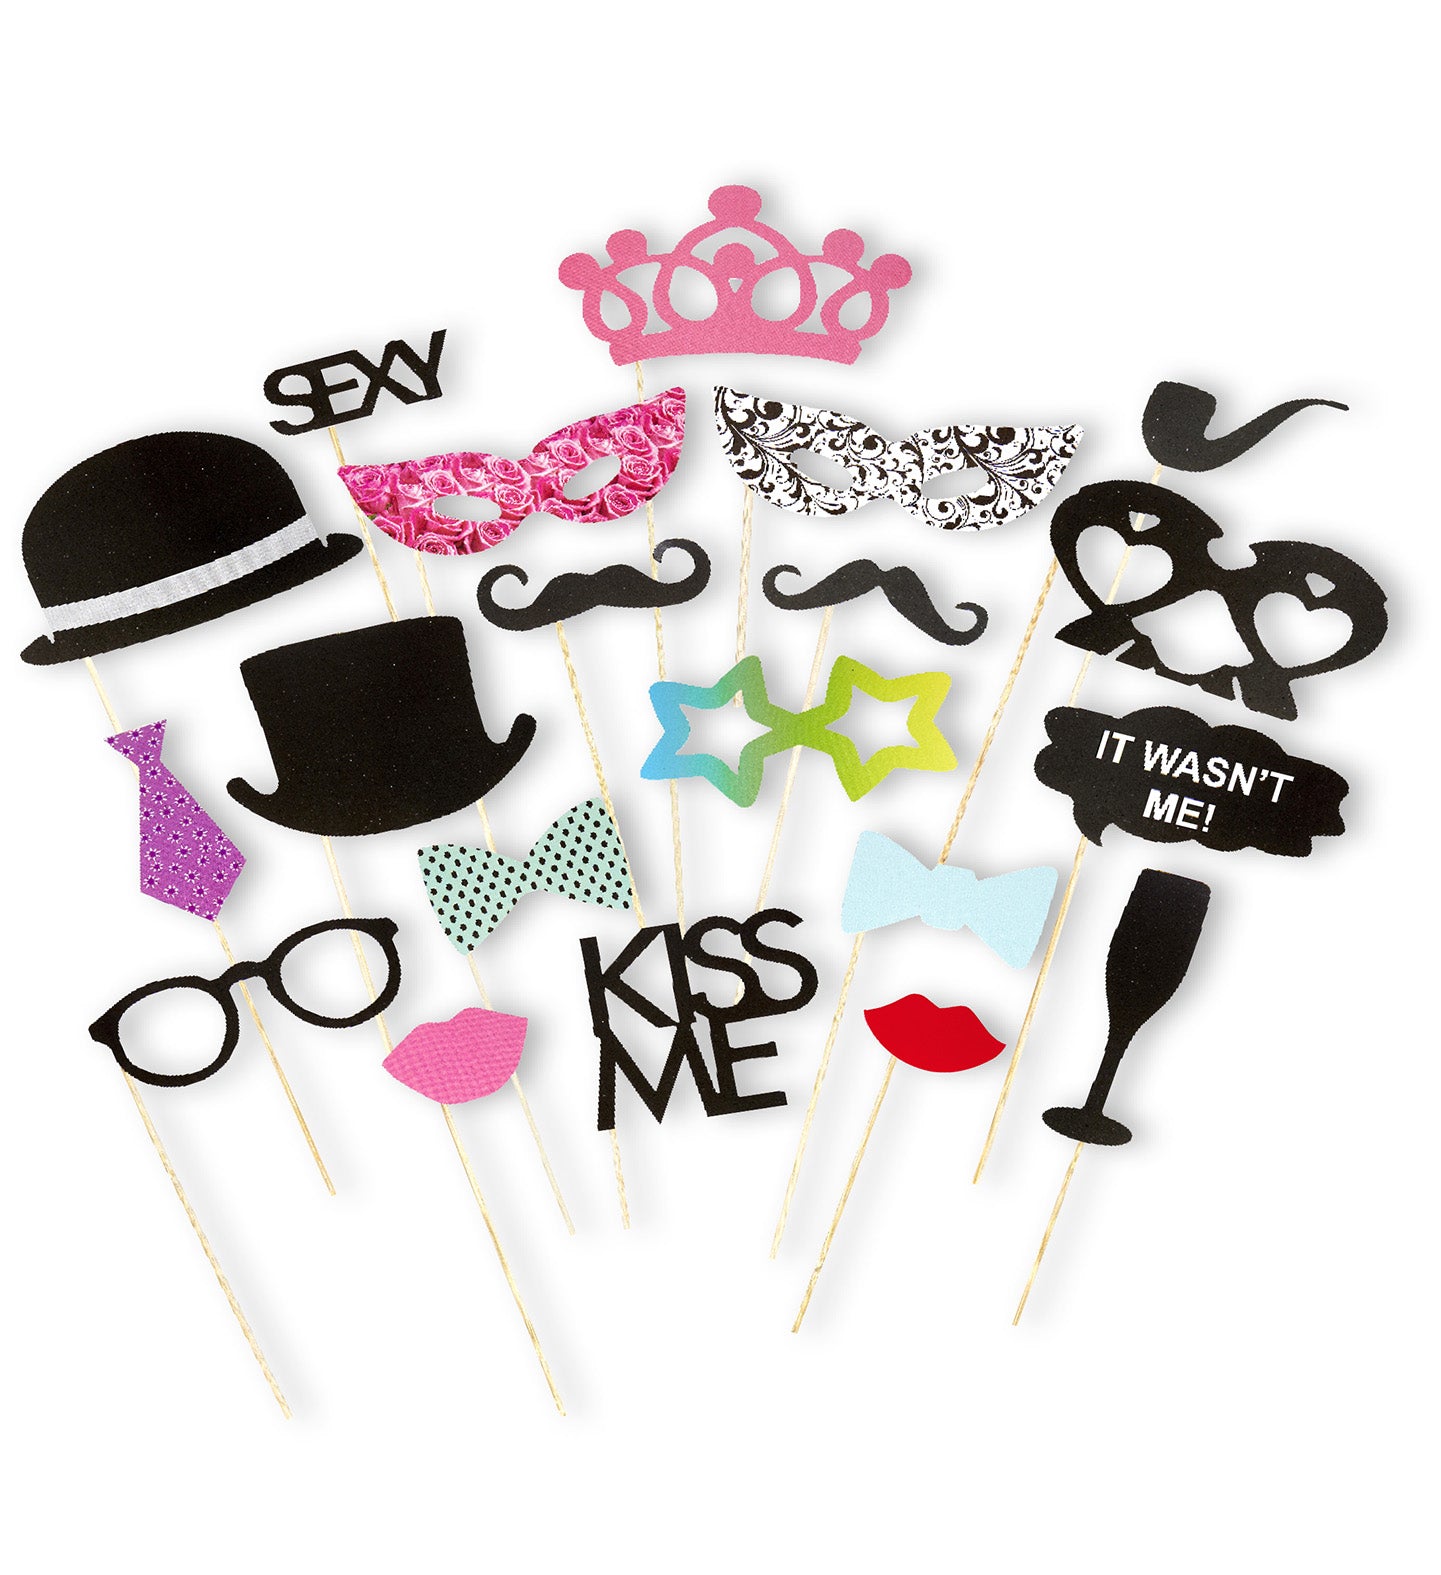 Photo Booth Wedding Accessories